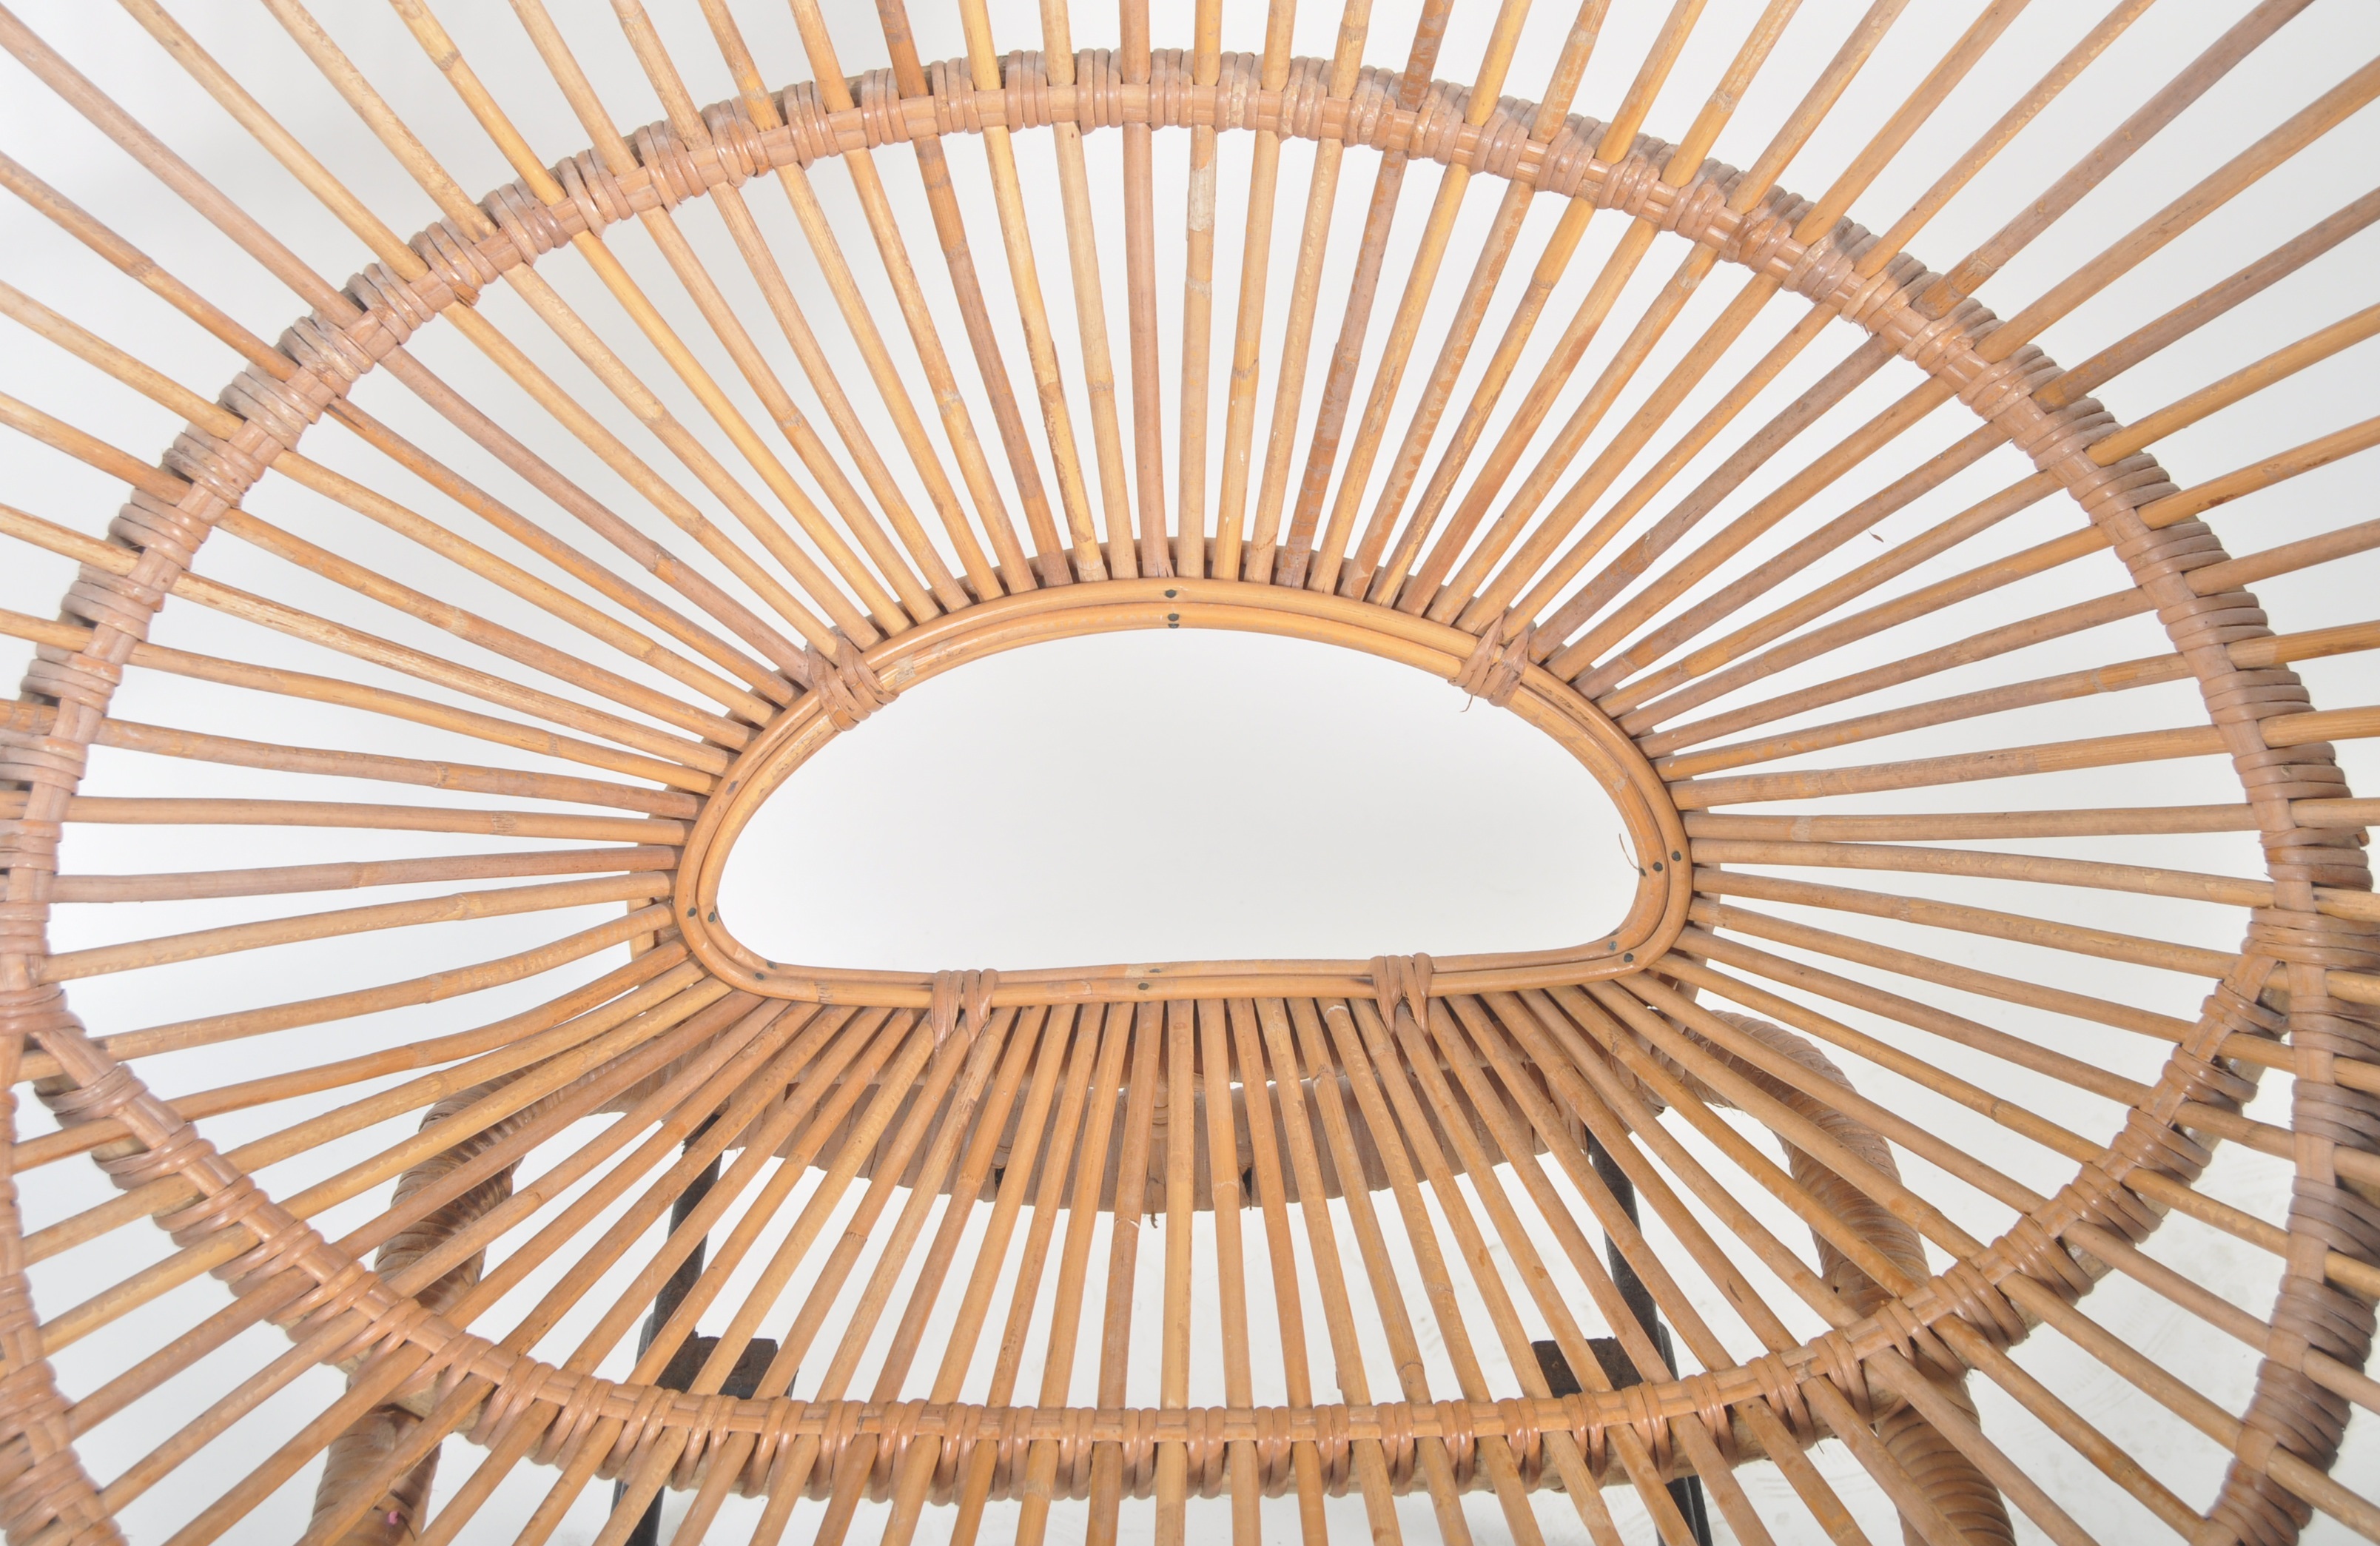 FRANCO ALBINI MID 20TH CENTURY CANE & BAMBOO SATELLITE HOOP CHAIR - Image 4 of 6